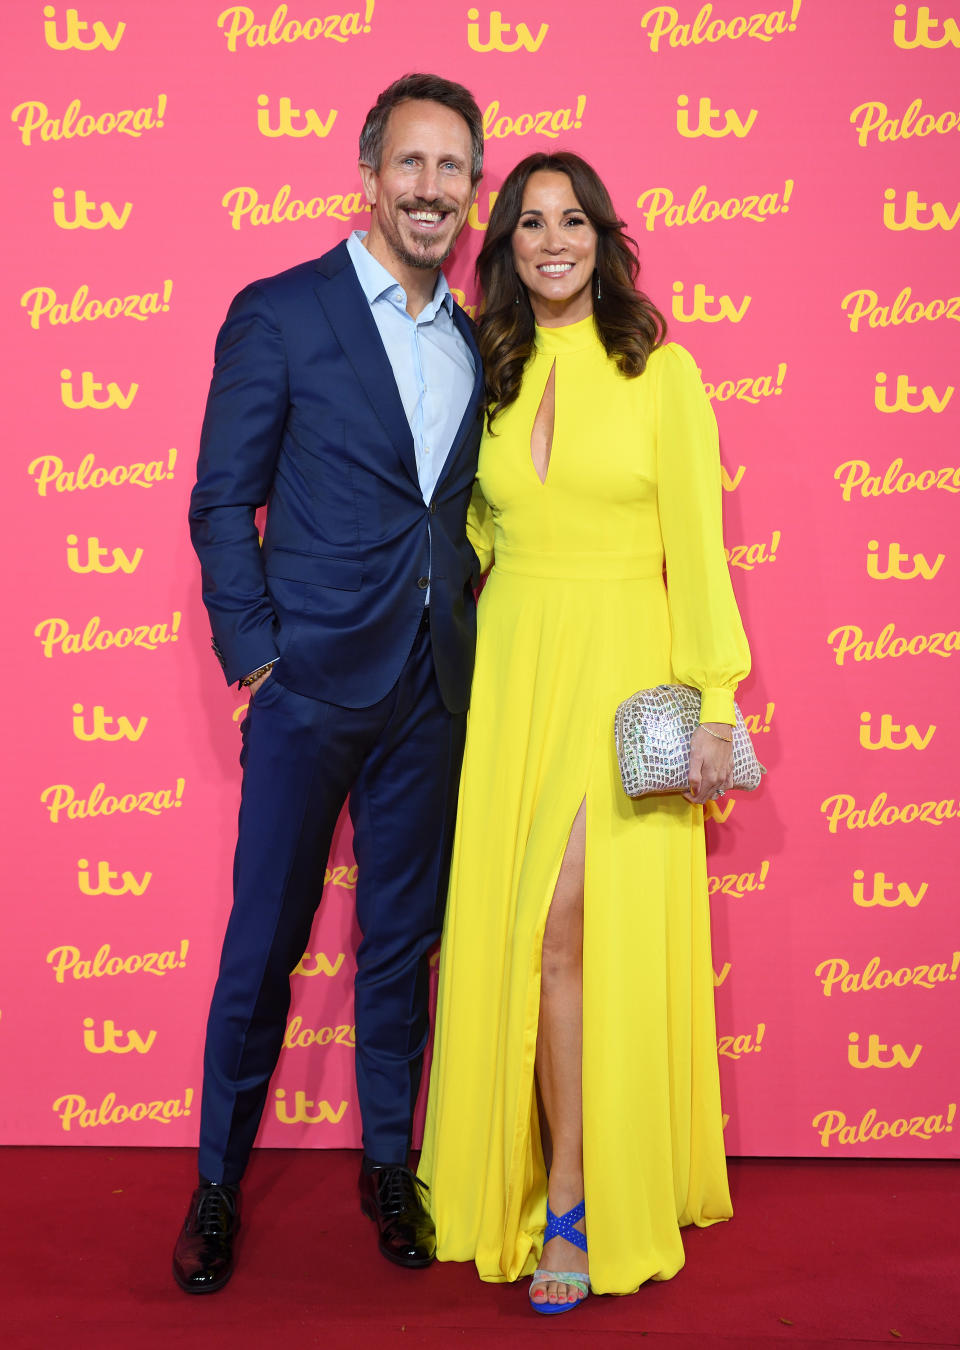 Nick Feeney and Andrea McLean attend the ITV Palooza 2019 at The Royal Festival Hall on November 12, 2019 in London, England. (Photo by Karwai Tang/WireImage)